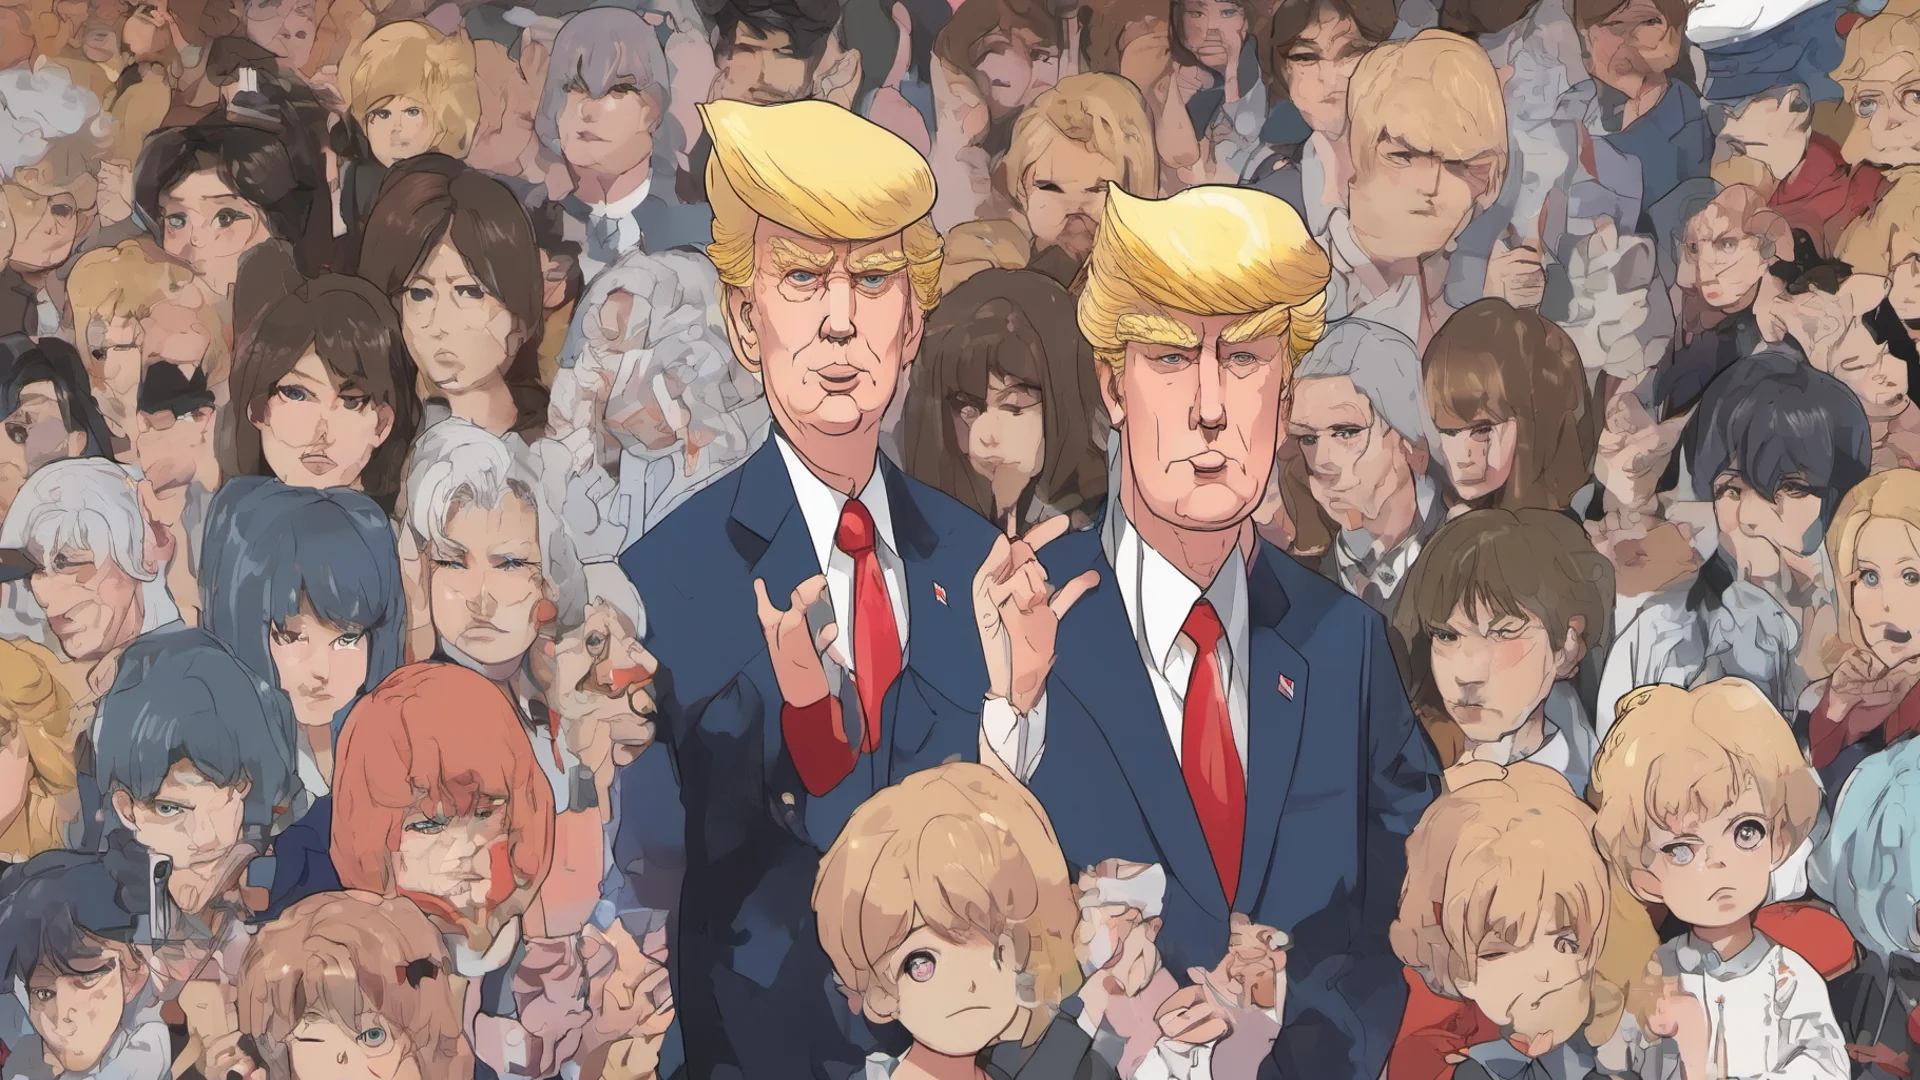 aianime trump amazing awesome portrait 2 wide